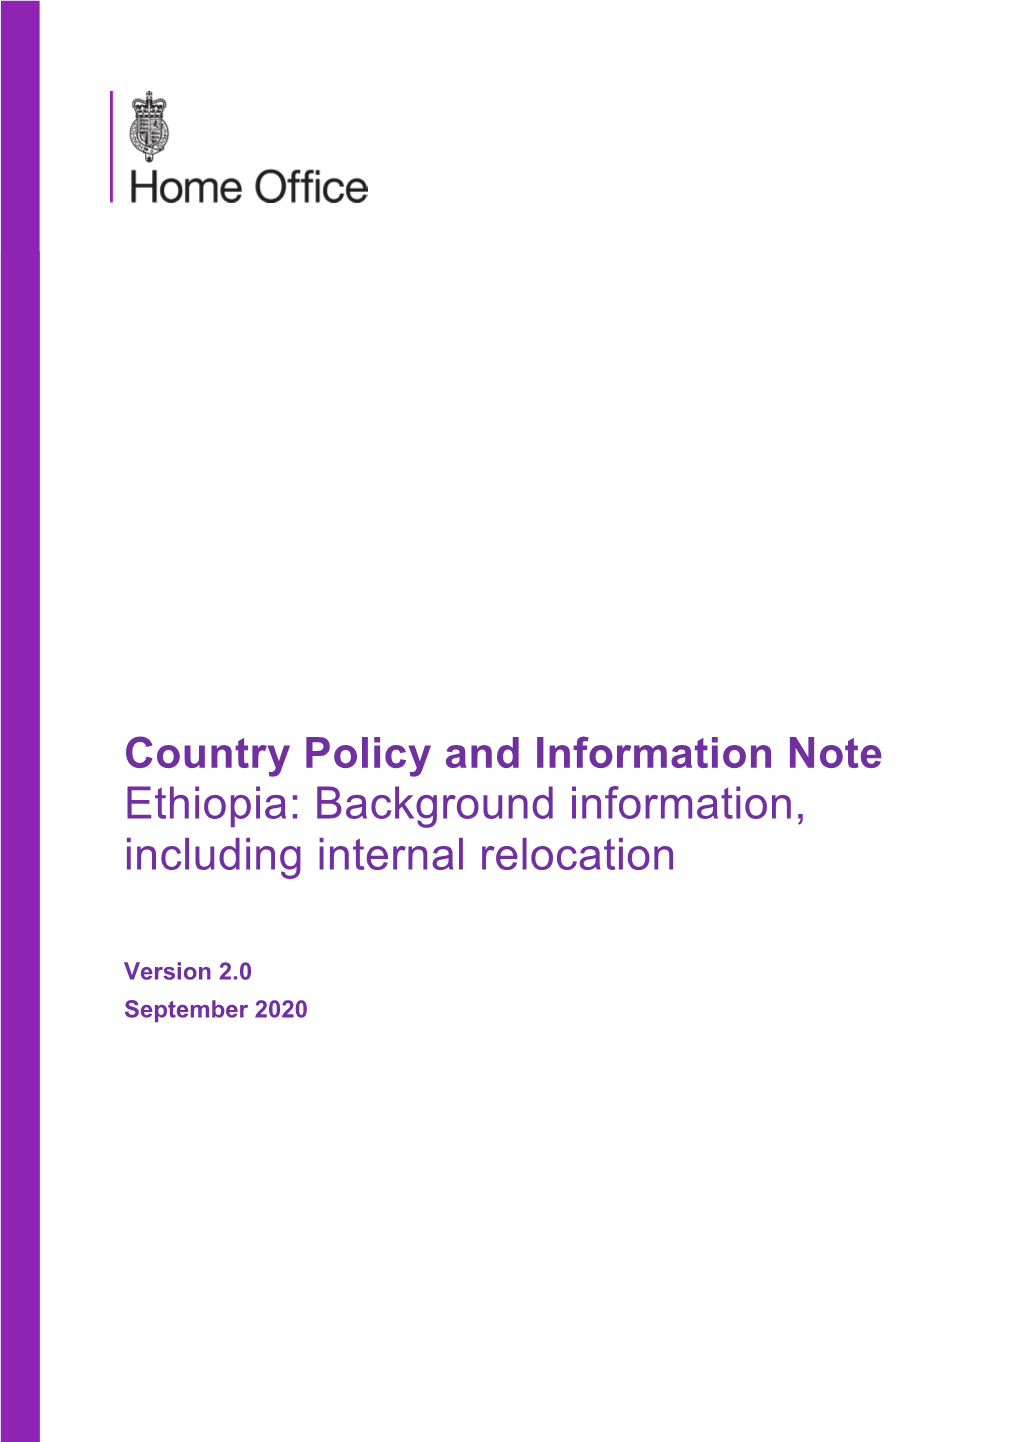 Country Policy and Information Note Ethiopia: Background Information, Including Internal Relocation